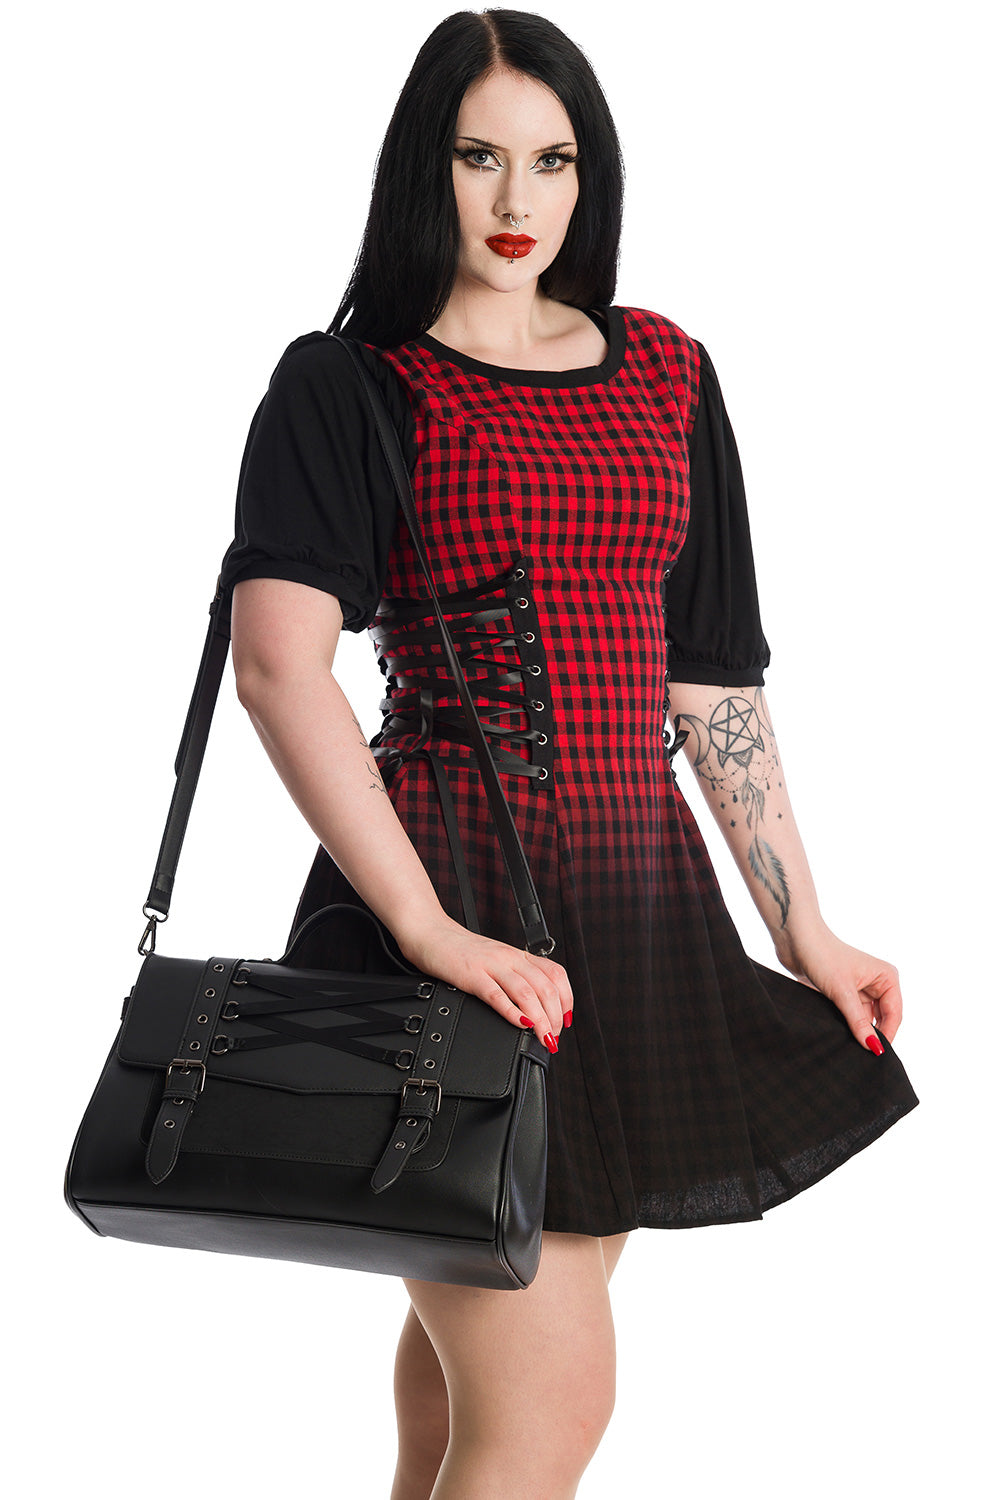 Alternative model in red check dress holding Black corset detailed handbag with buckles